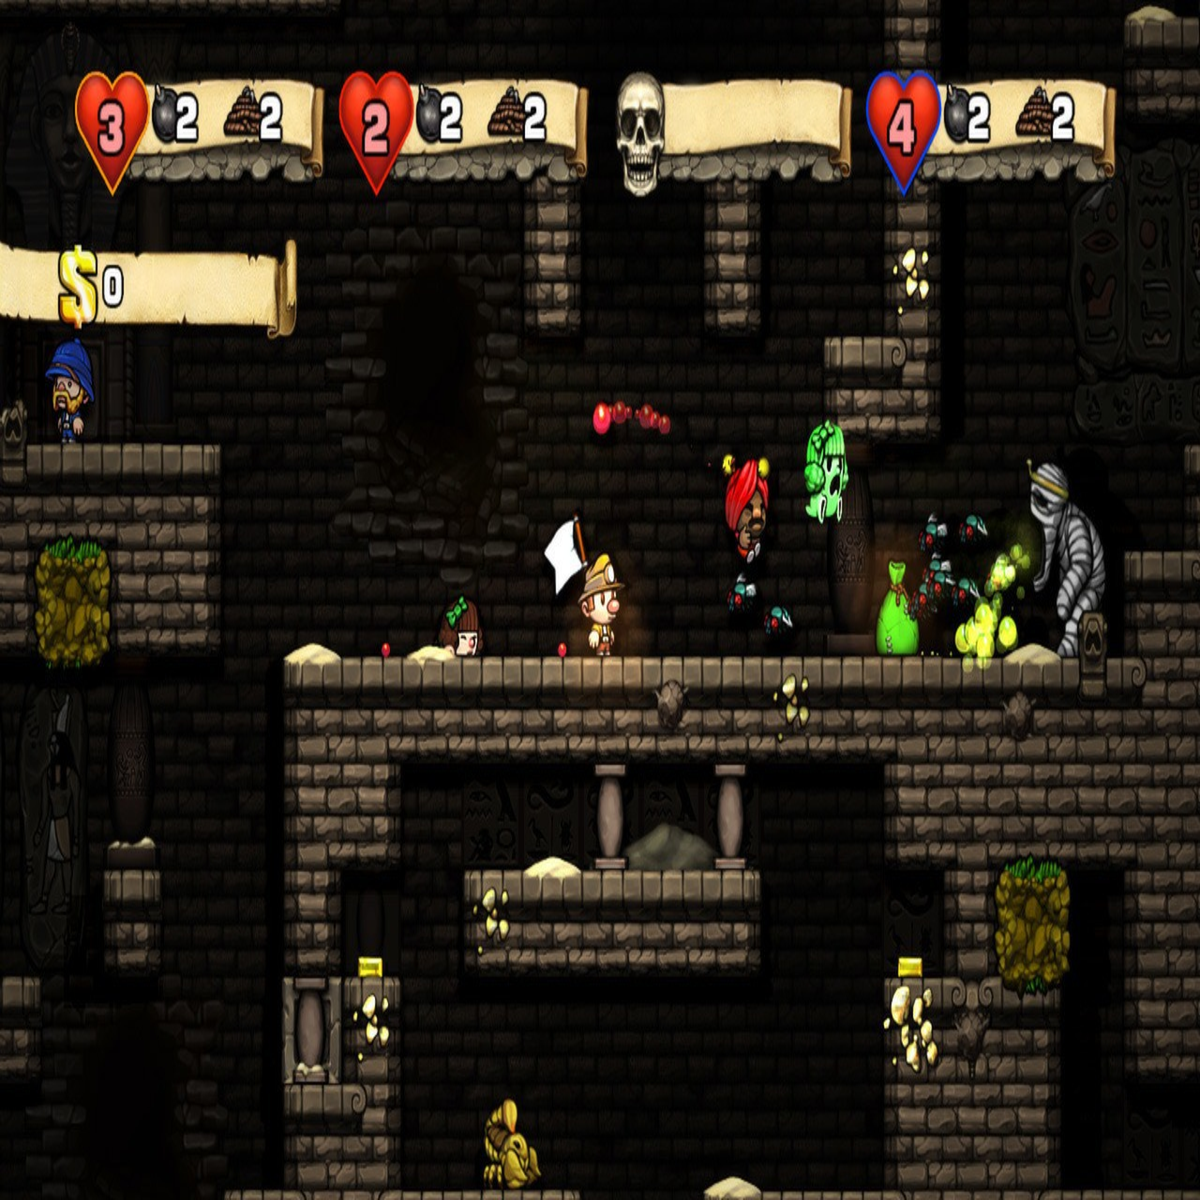 Learning Vital Life Skills from Spelunky | VG247